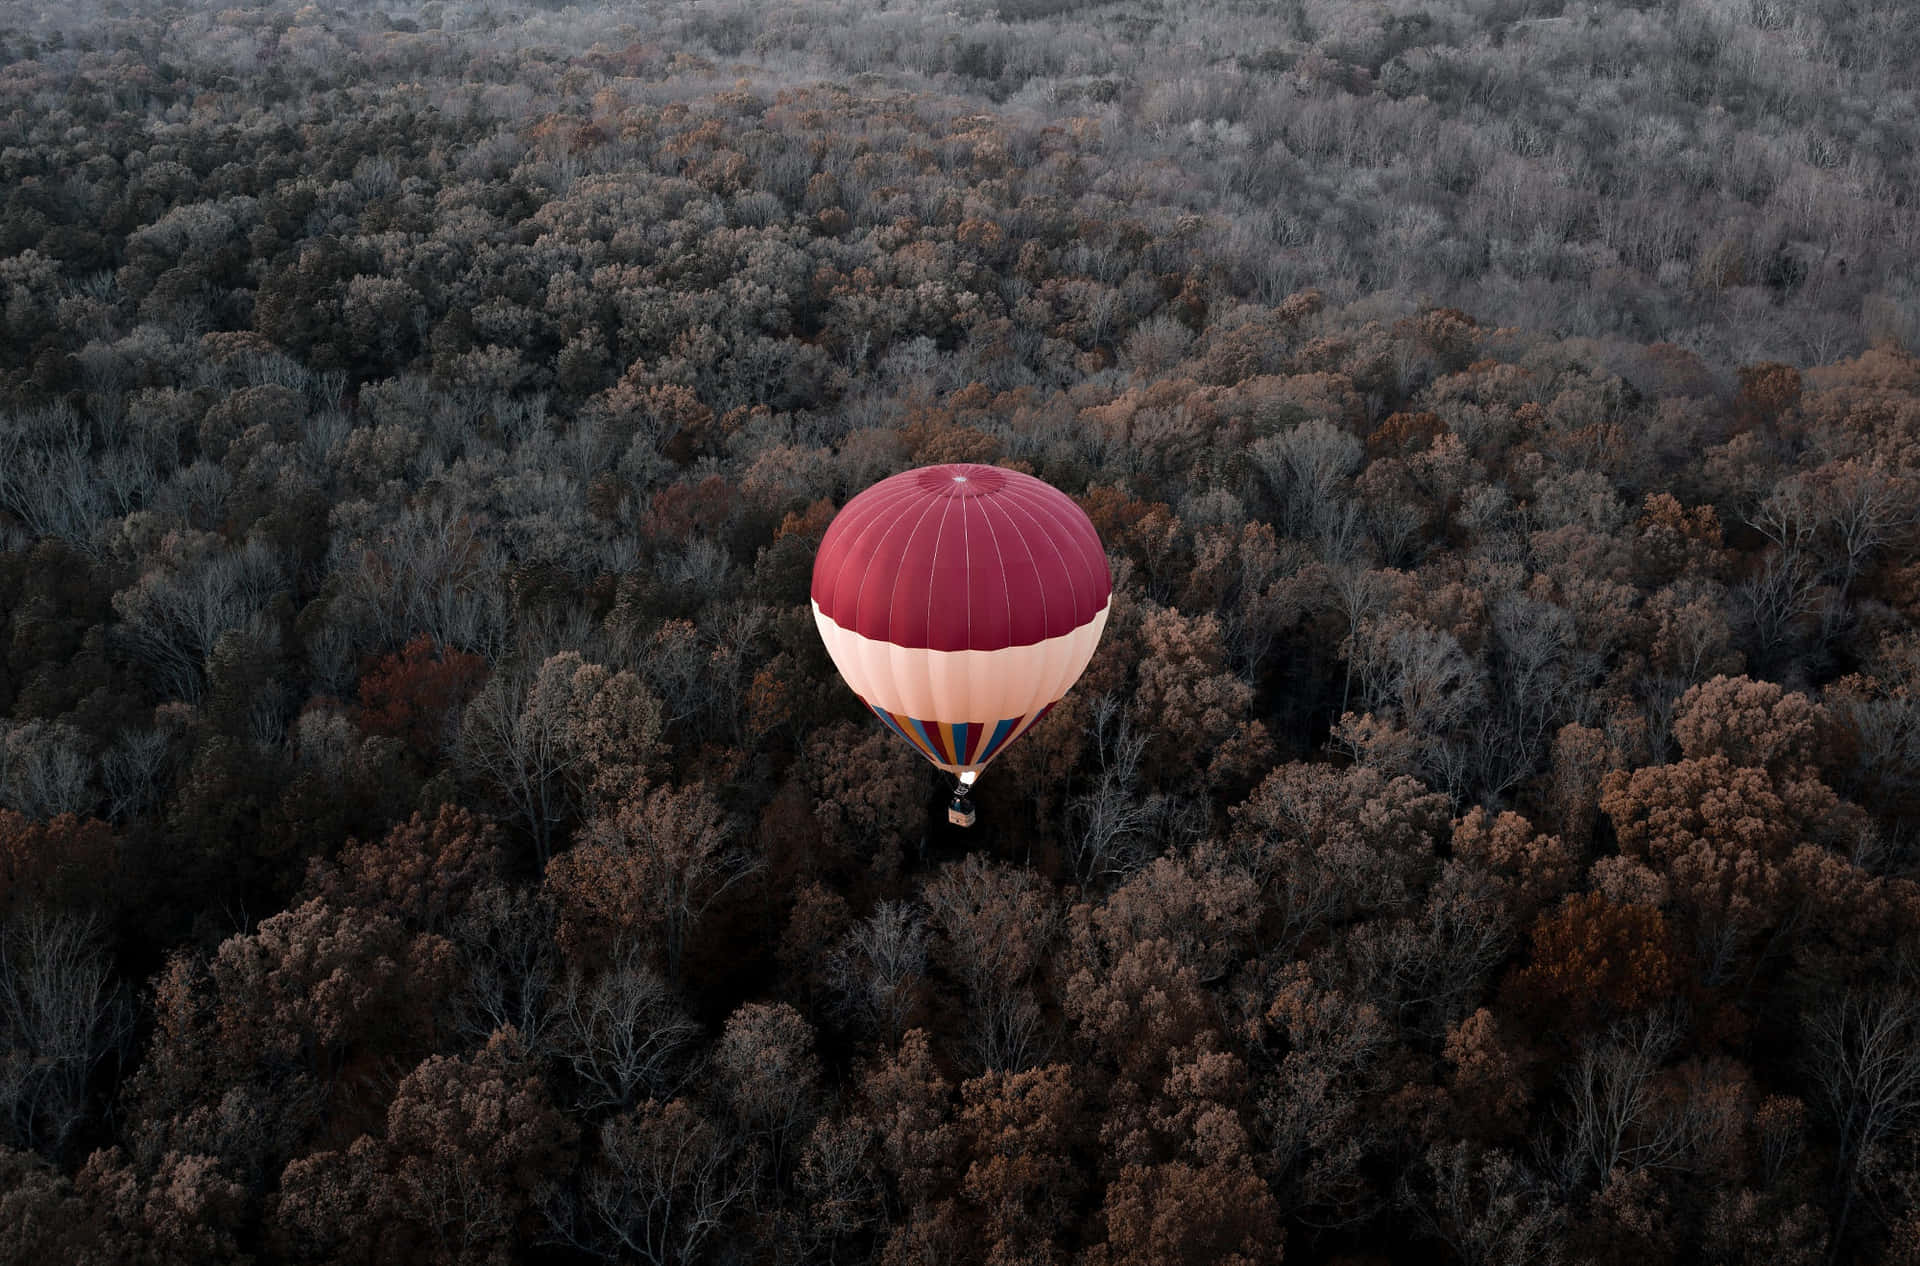 Tethered hot air balloon in front of a majestic mountainside at sunrise